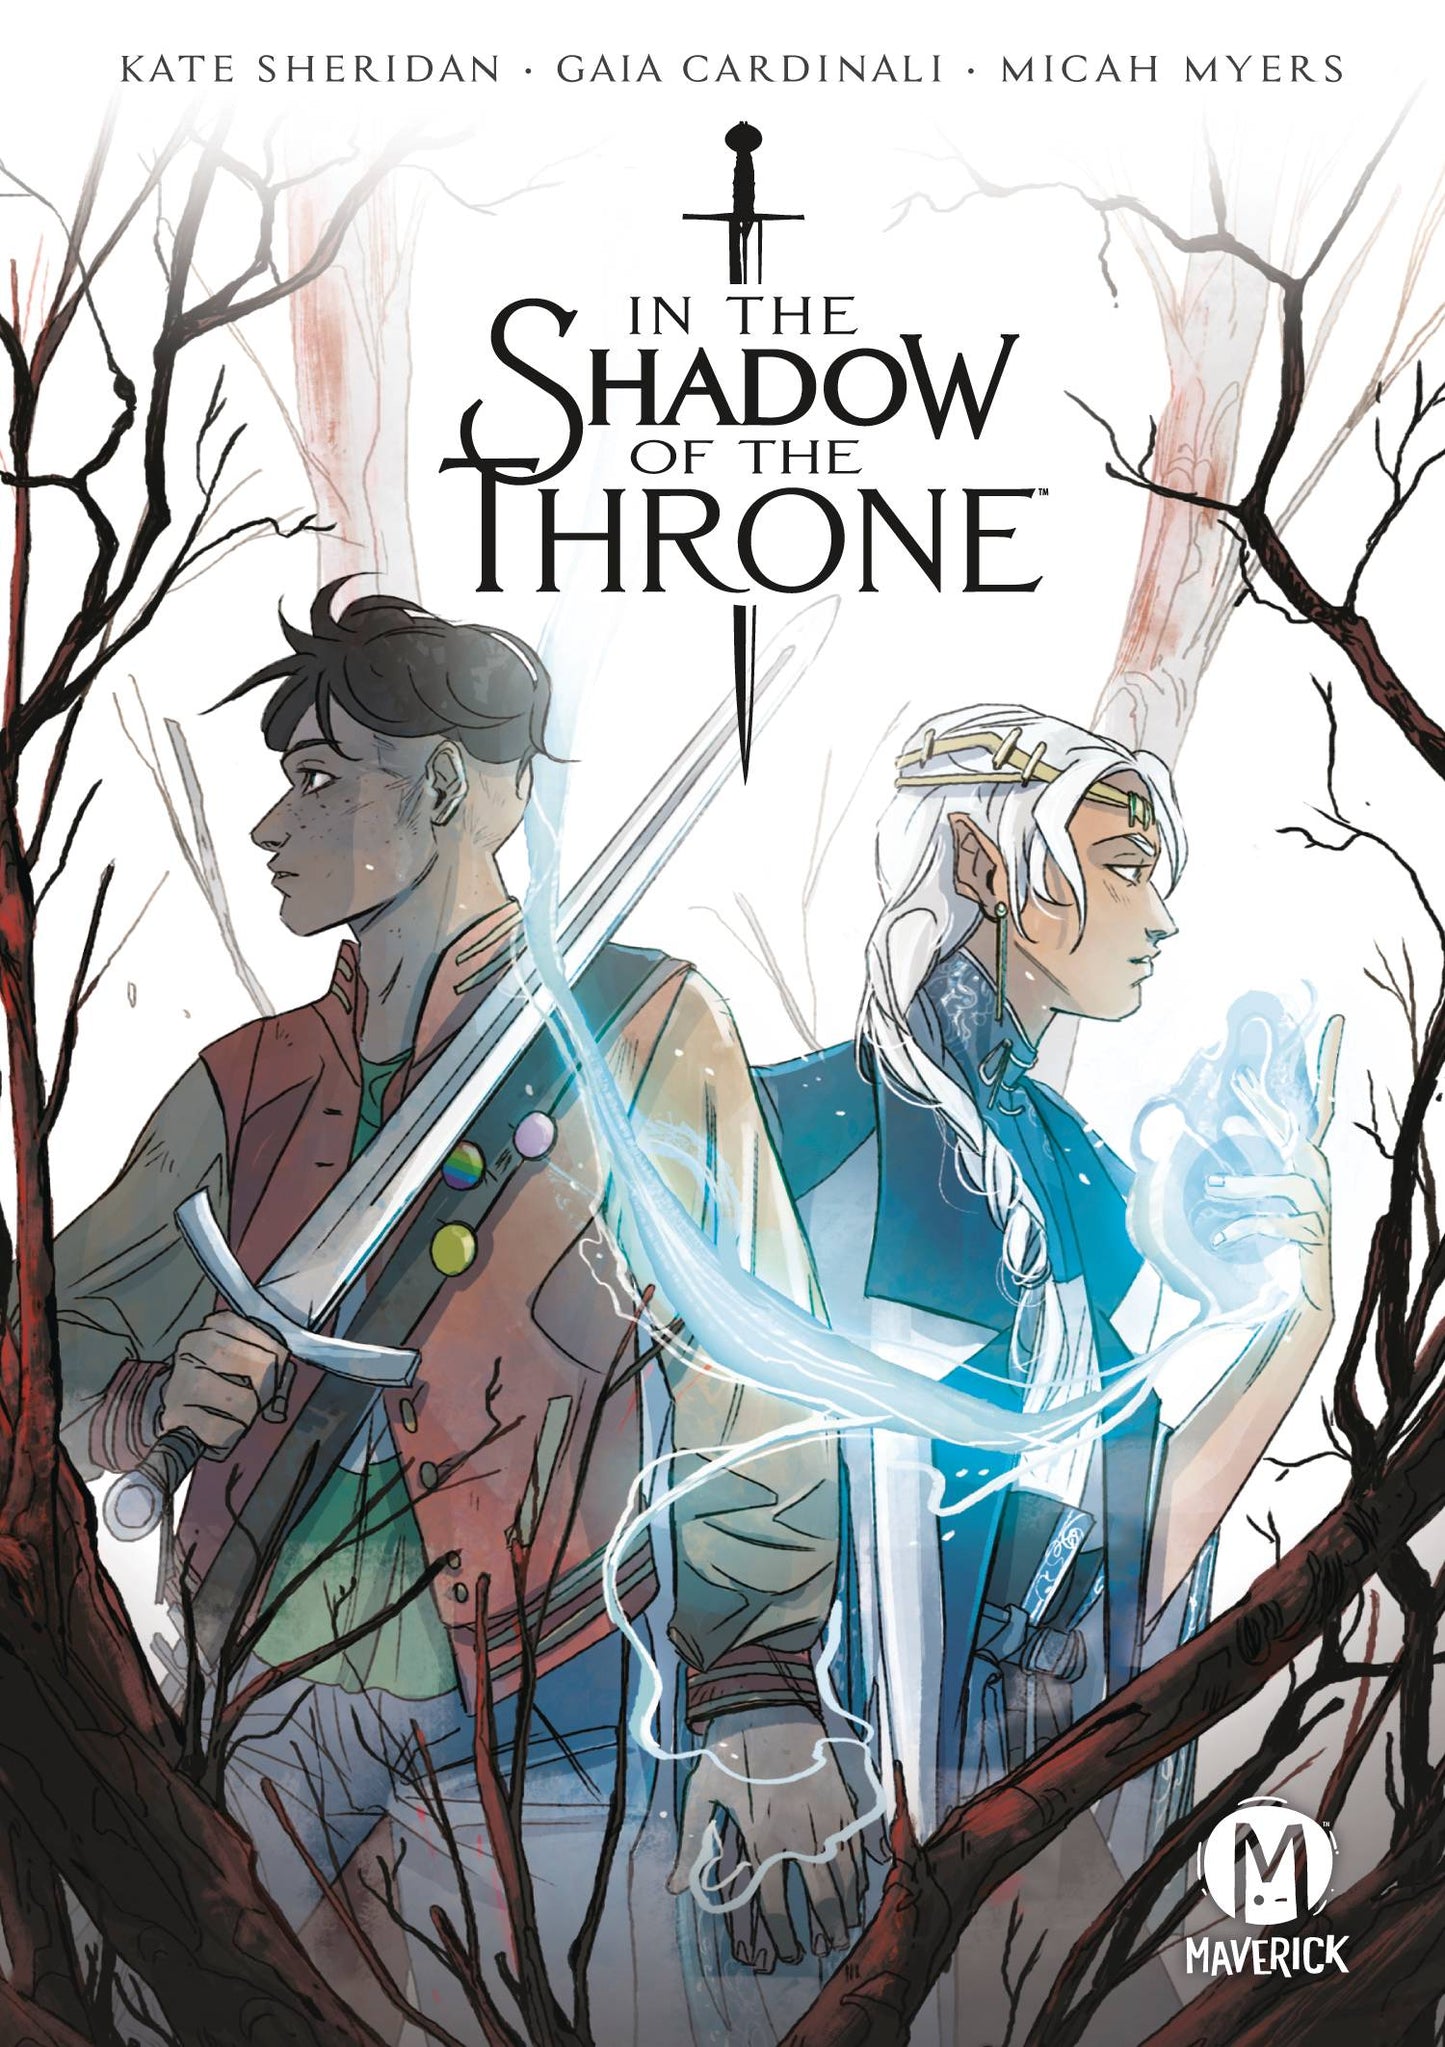 The One Stop Shop Comics & Games In The Shadow Of The Throne Ogn (C: 0-1-1) (08/10/2022) MAVERICK -MAD CAVE STUDIOS